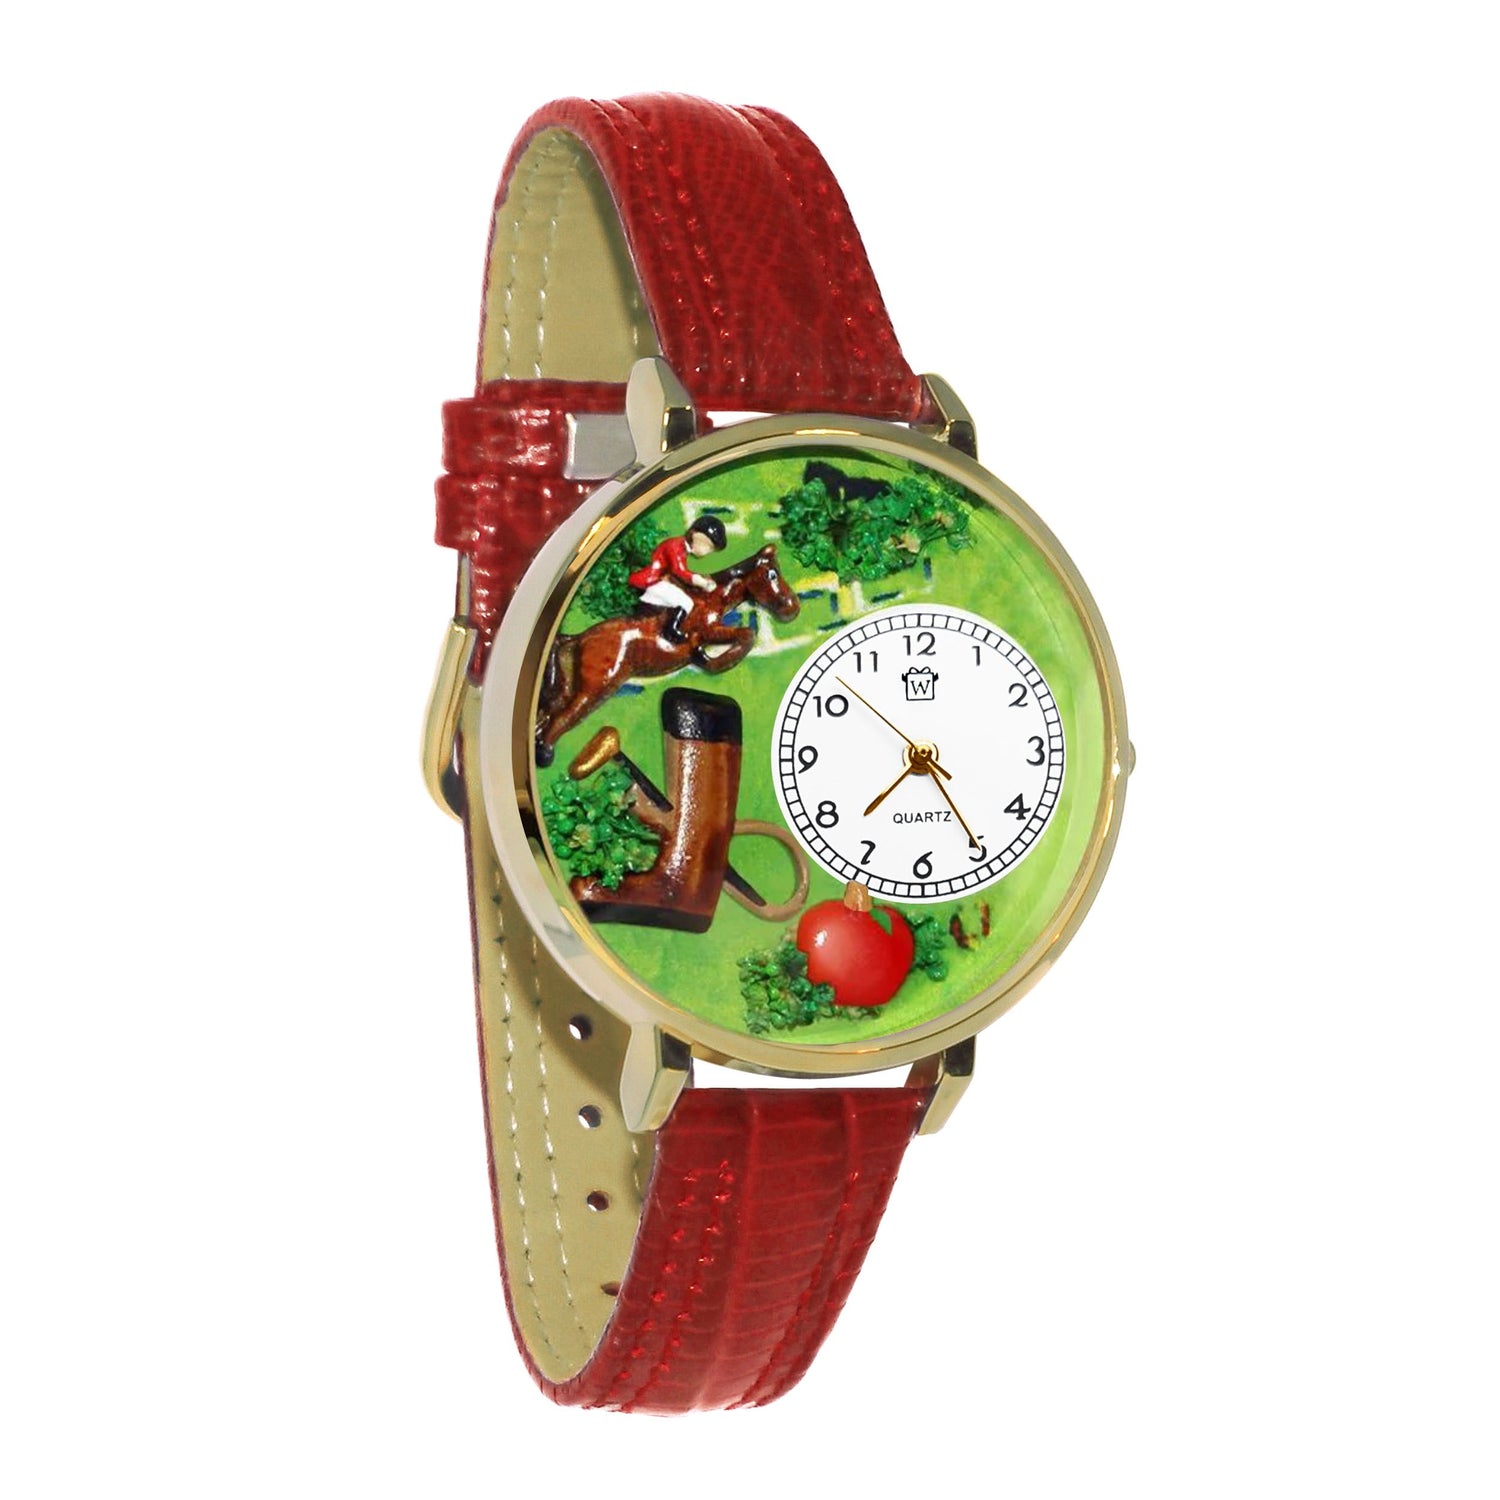 Whimsical Gifts | Horse Jumping Competition Equestrian 3D Watch Large Style | Handmade in USA | Animal Lover | Horse & Equestrian | Novelty Unique Fun Miniatures Gift | Gold Finish Red Leather Watch Band